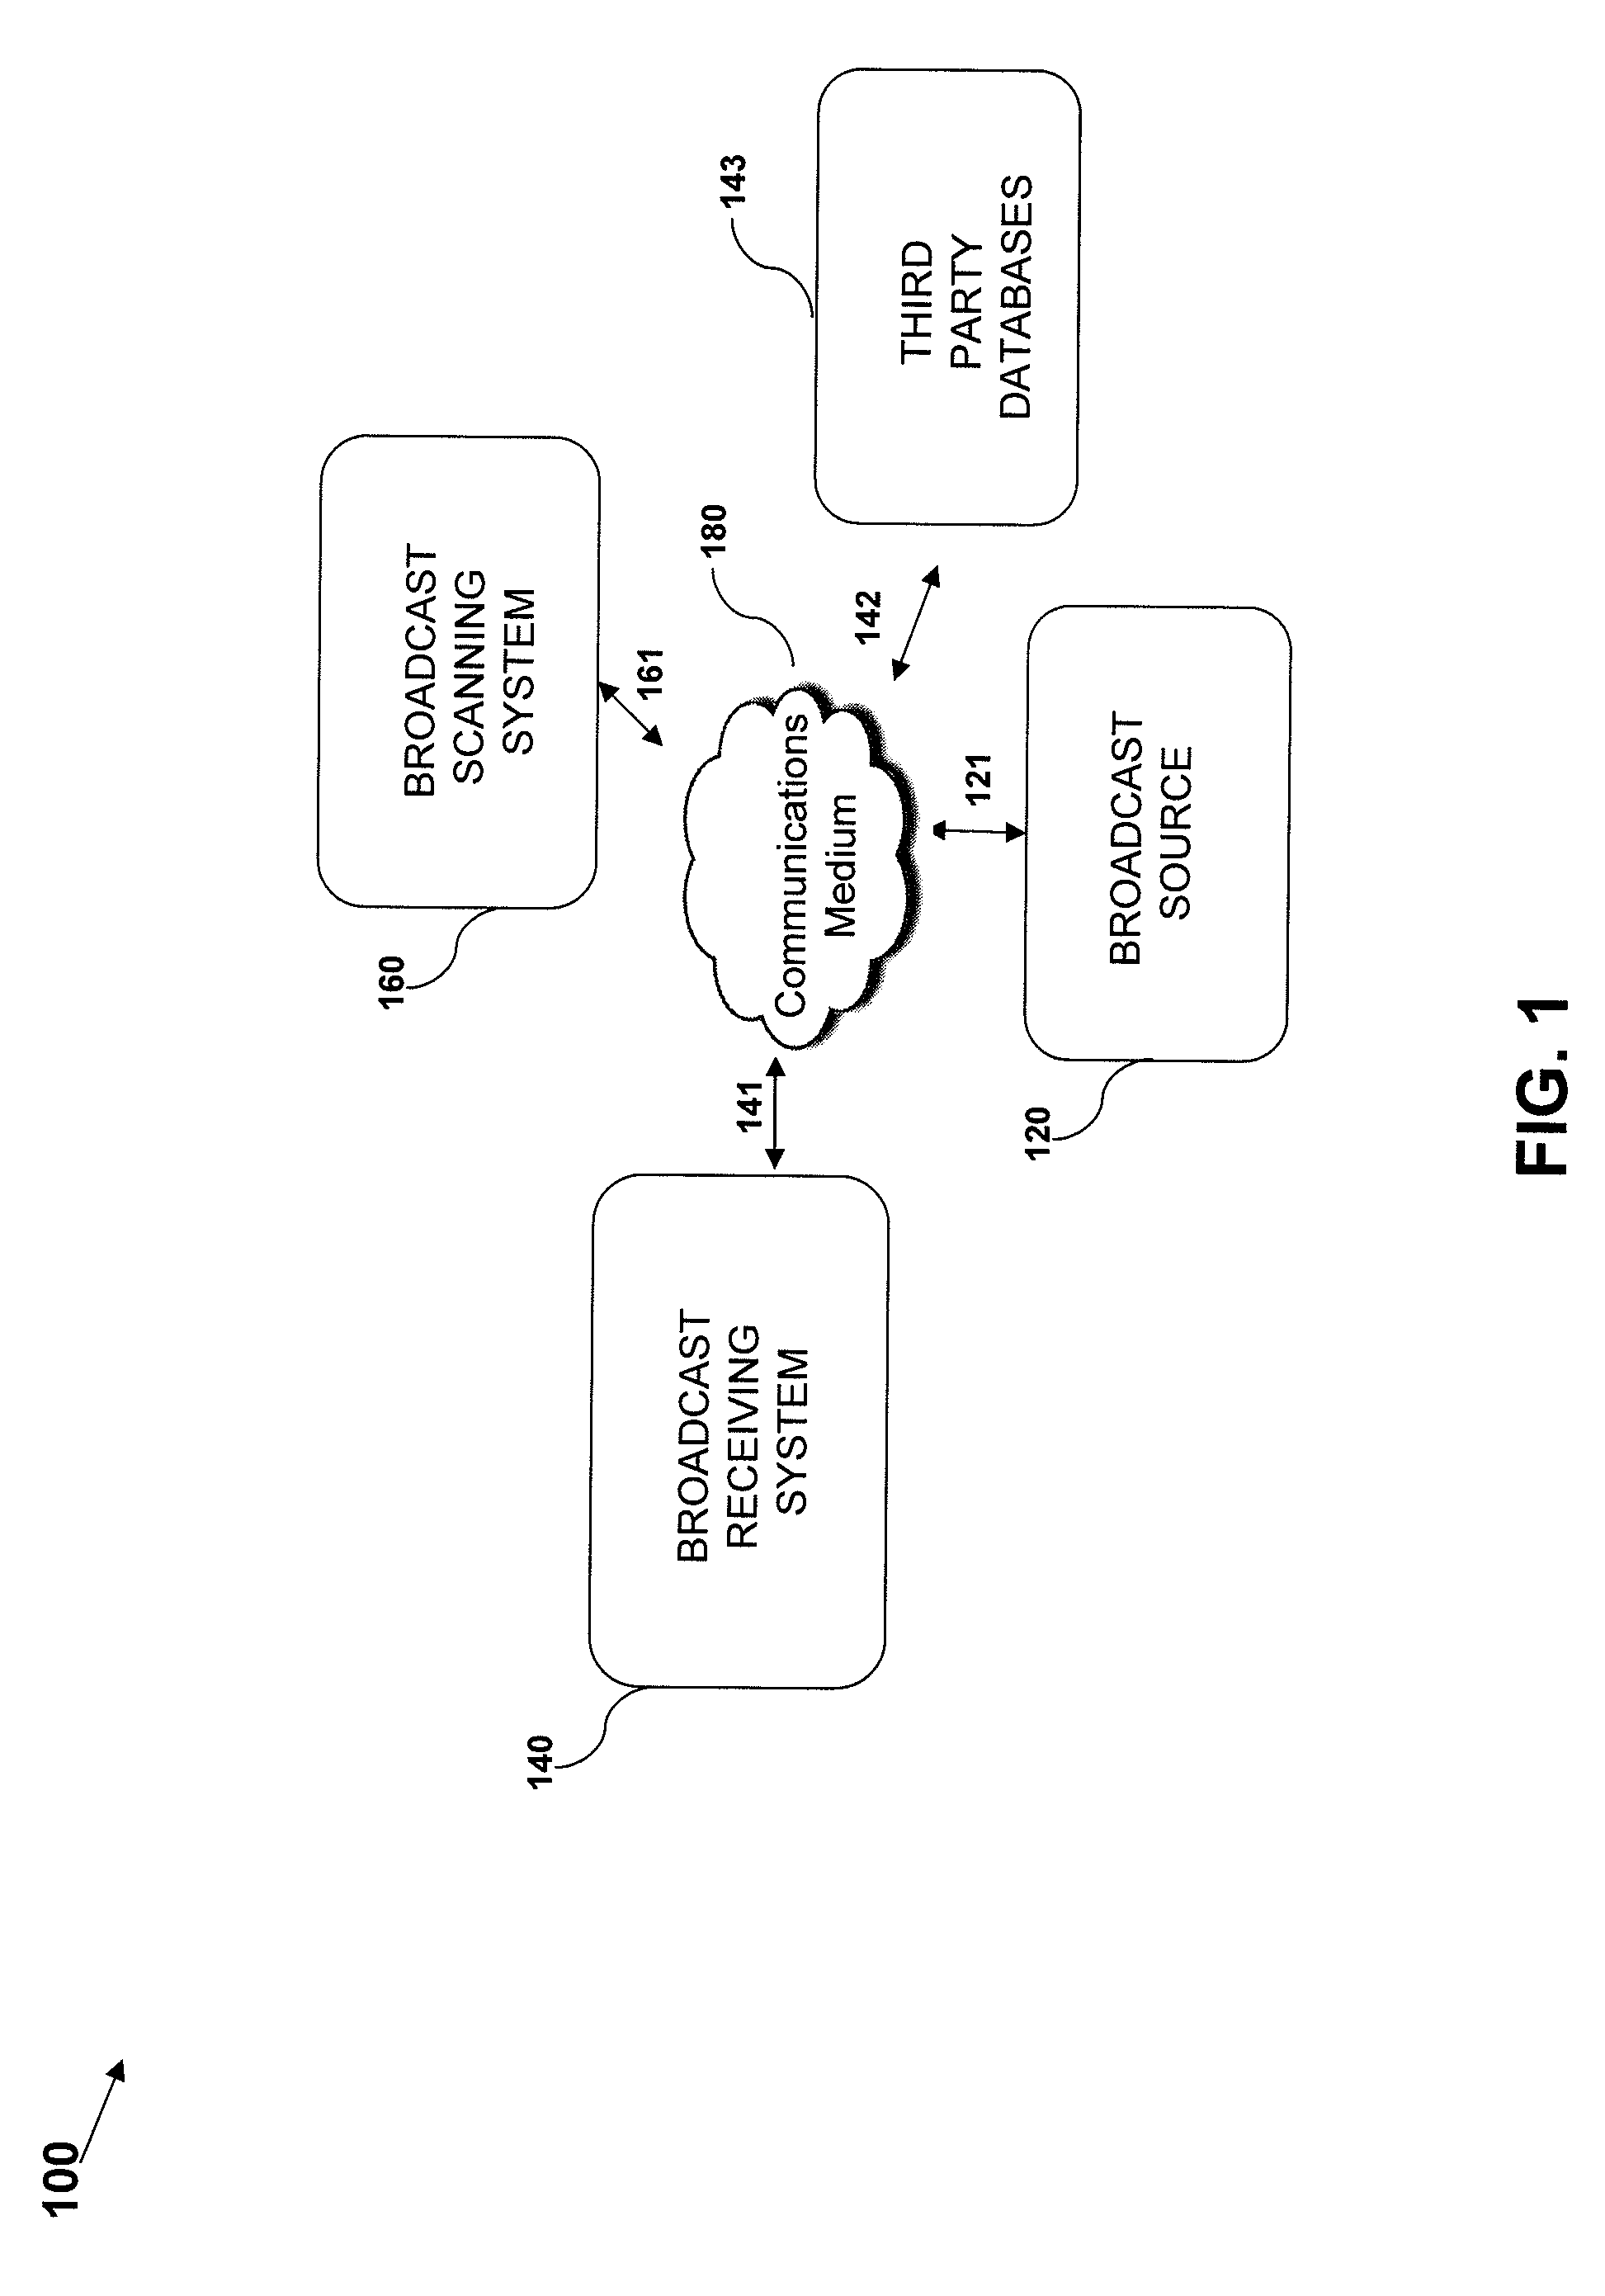 Systems, methods, and devices for scanning broadcasts